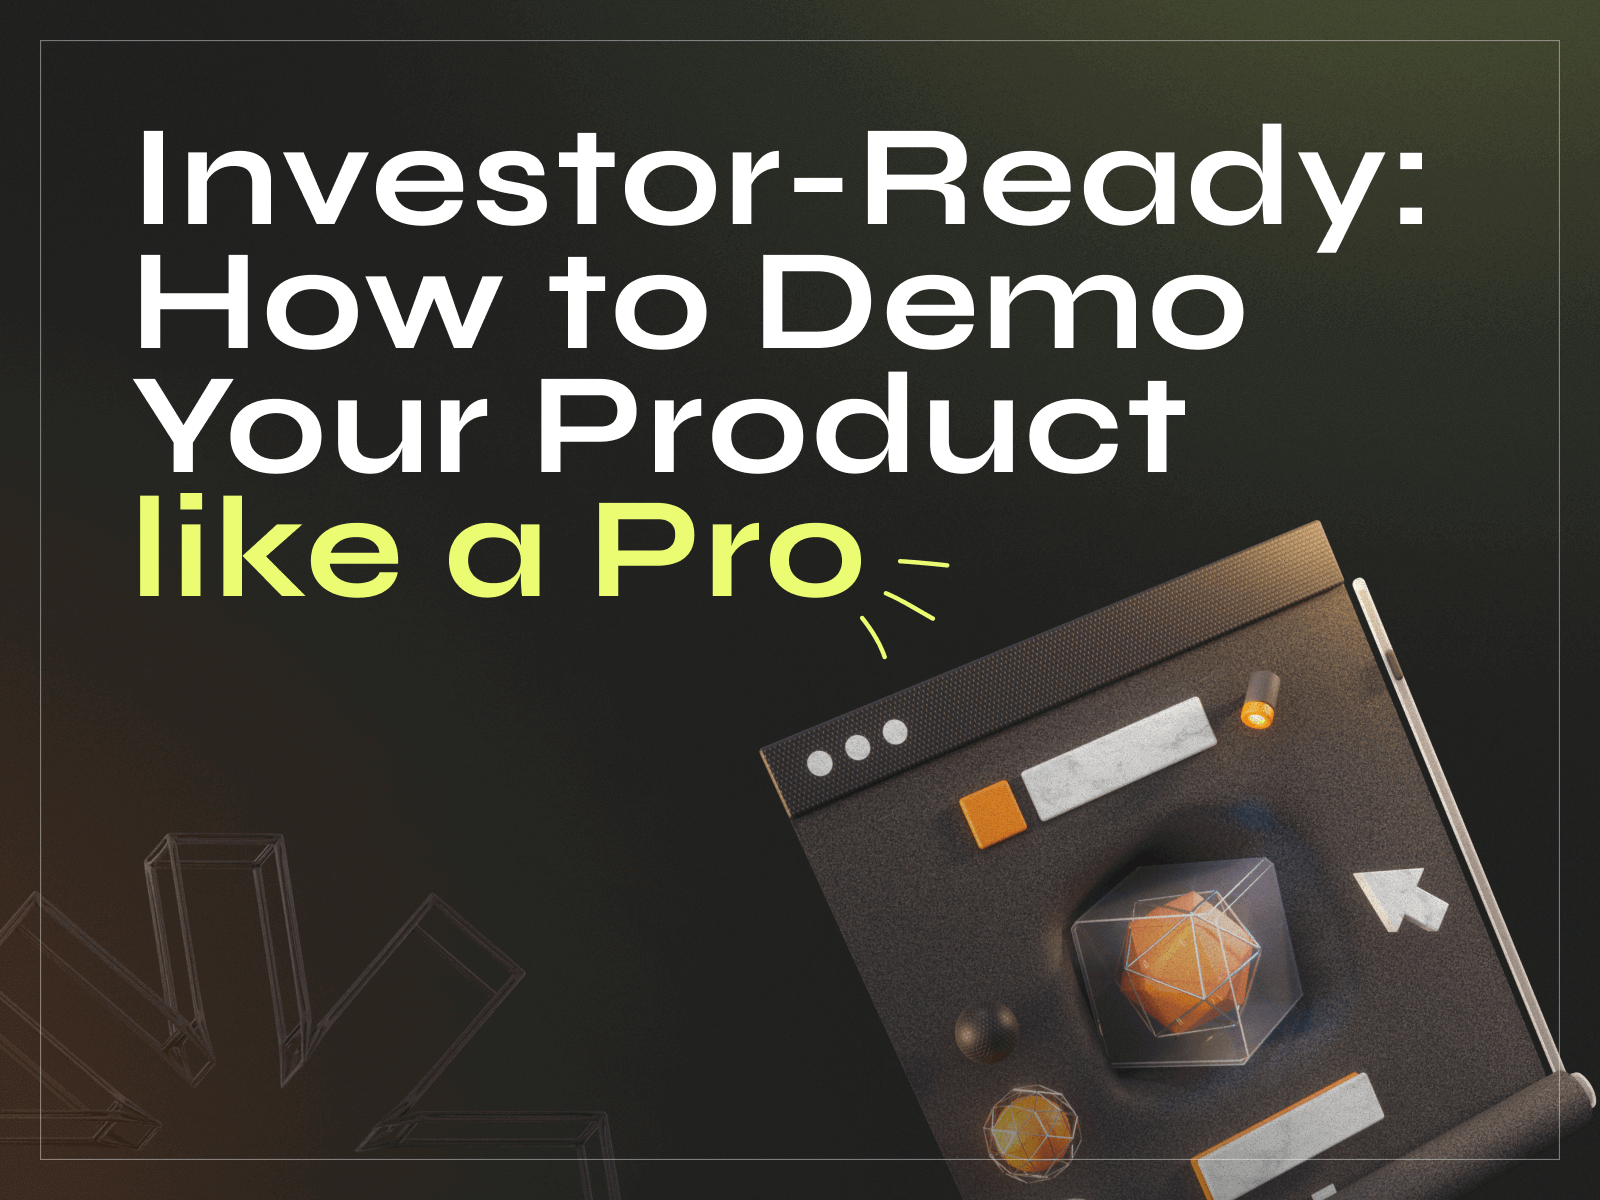 Investor-Ready: How to Demo Your Product Like a Pro - Photo 0